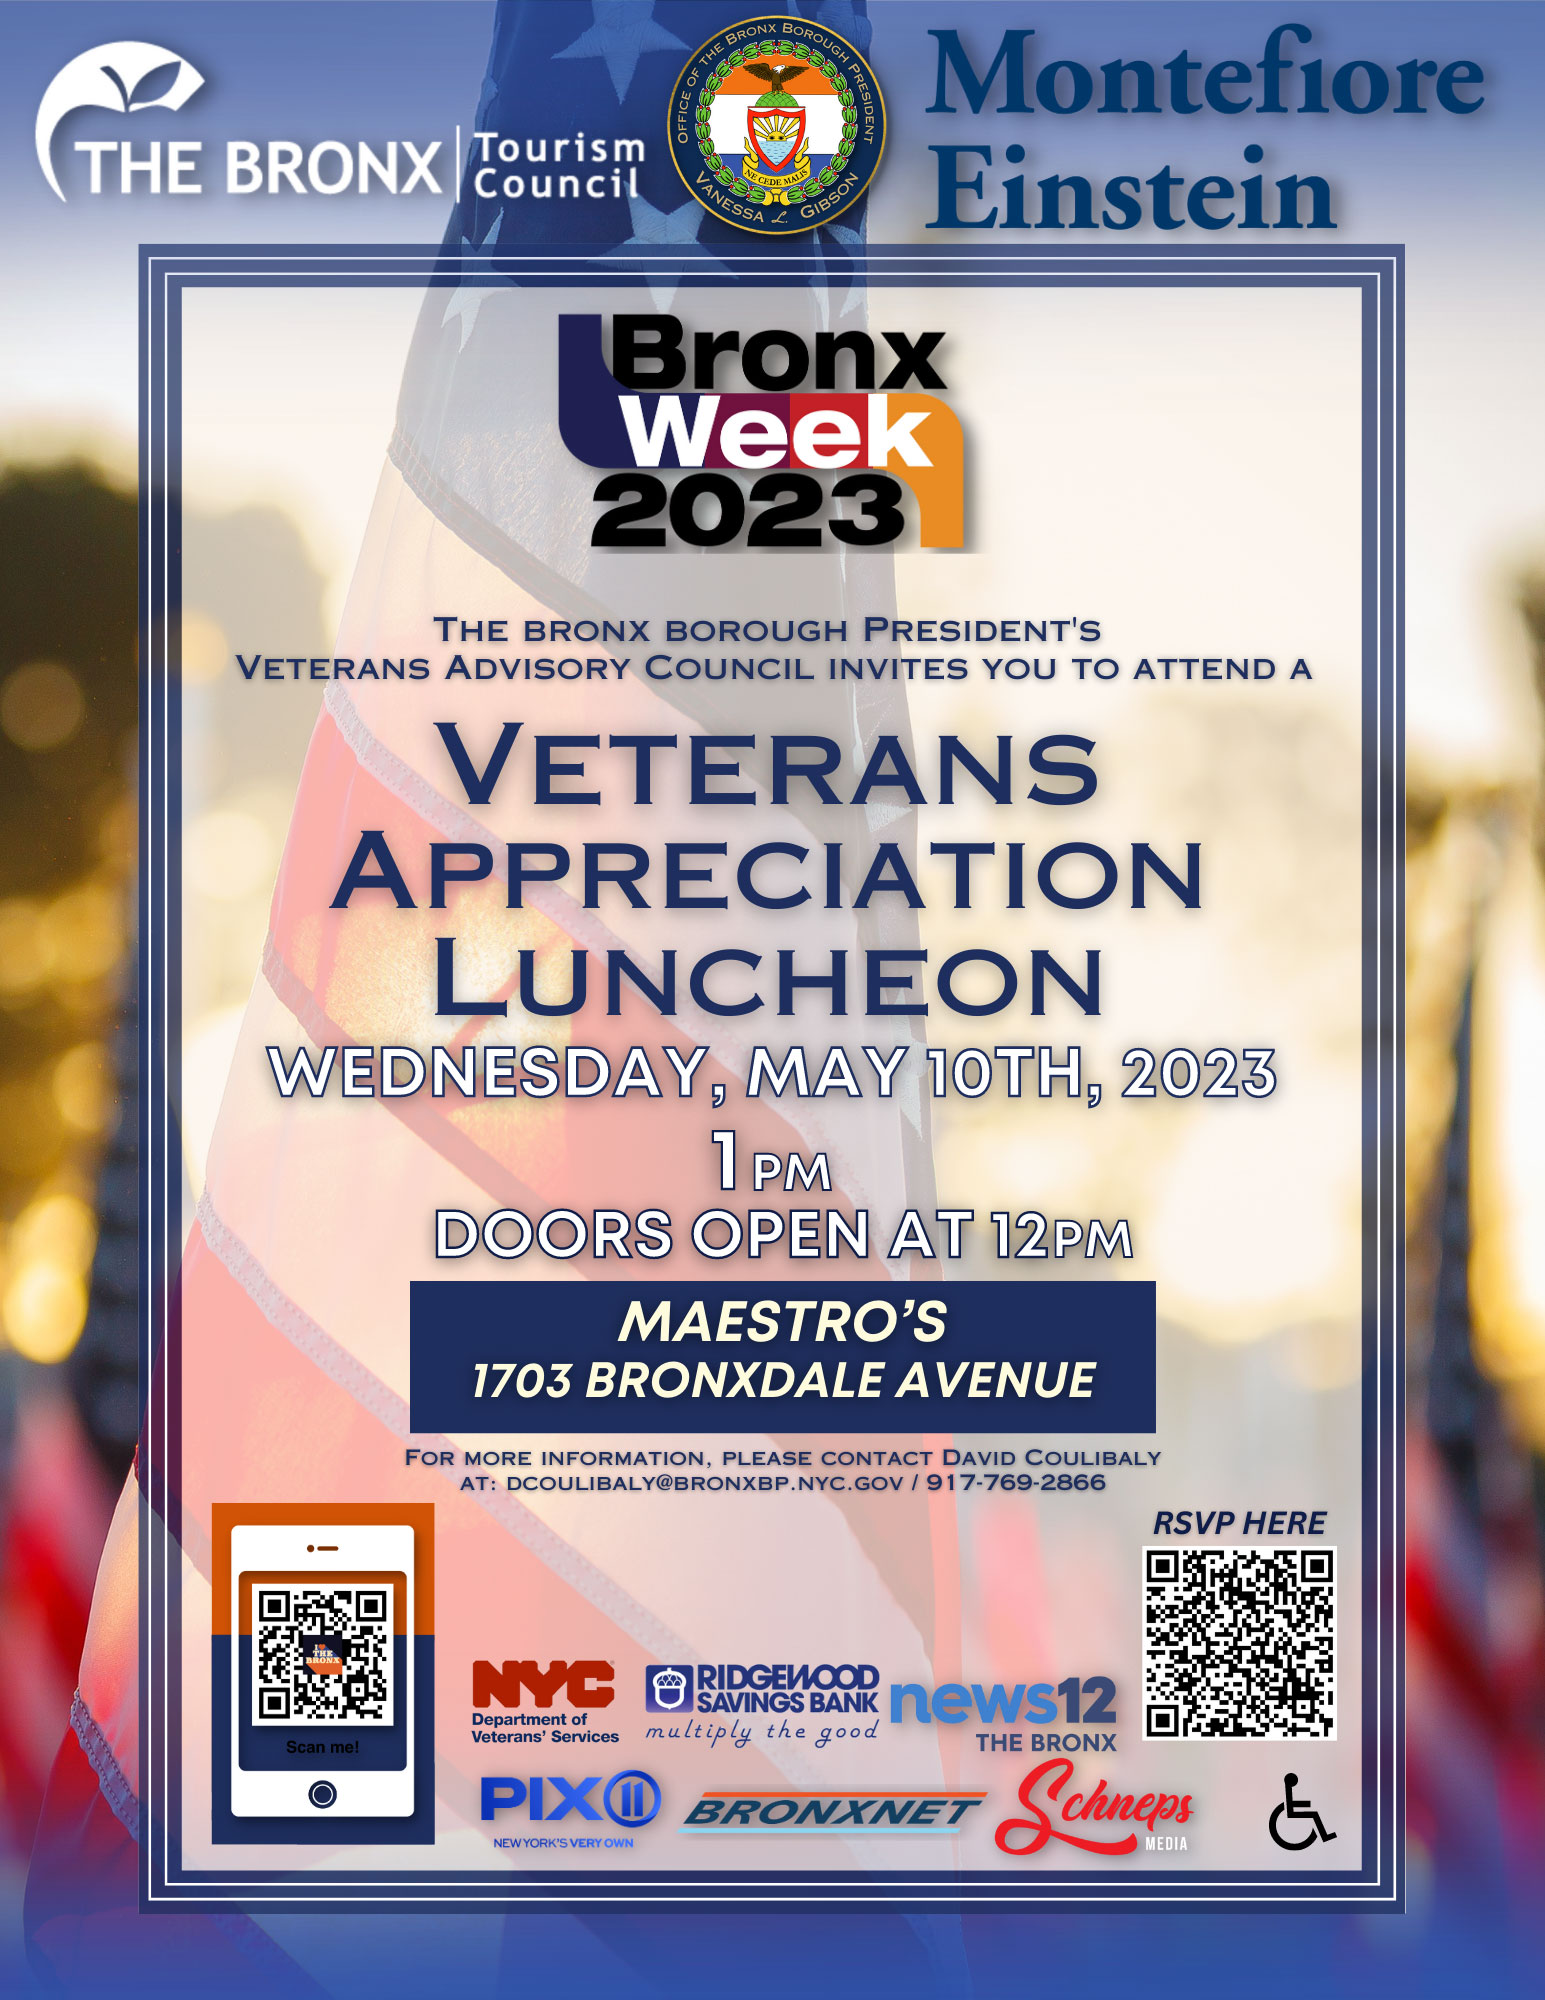 A flyer for the Bronx Week Veterans Apprecation Luncheon